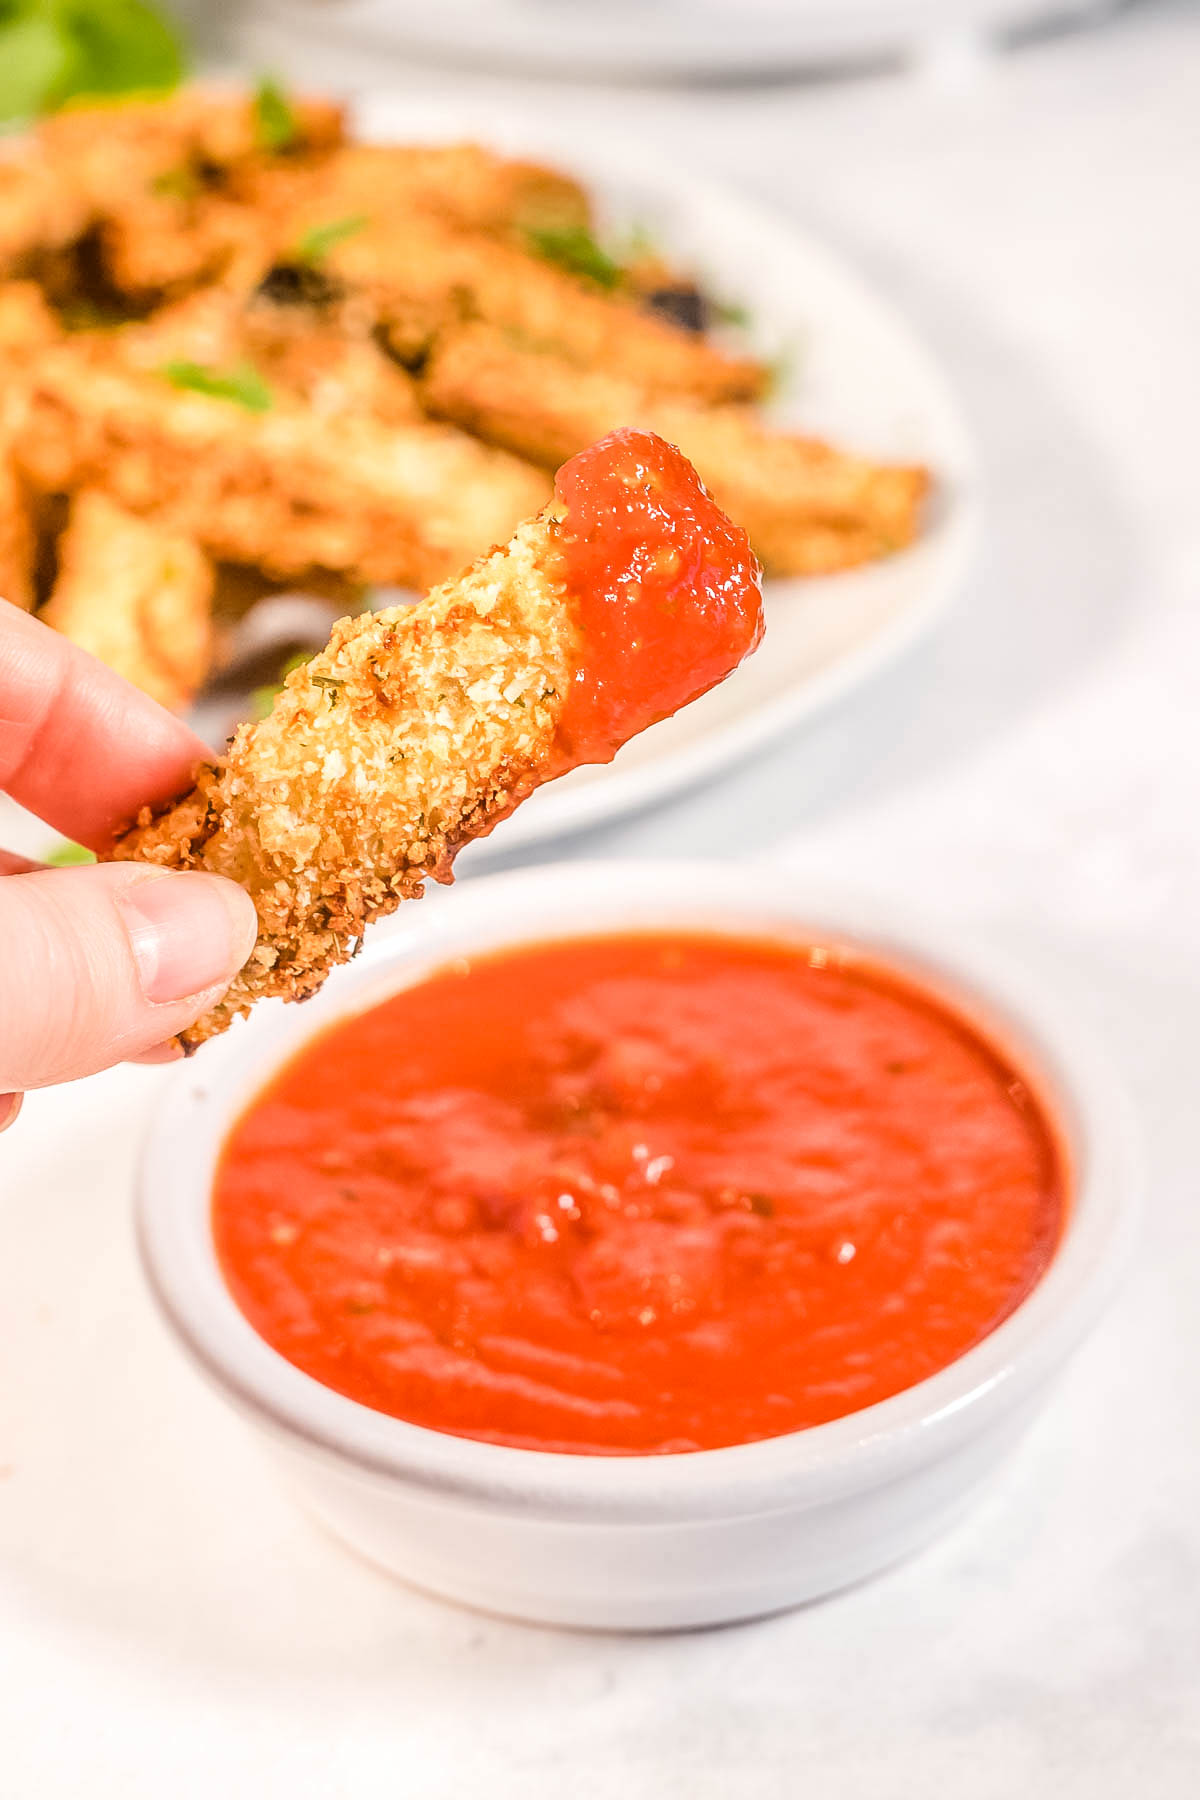 A eggplant fry being dipped into marinara sauce.